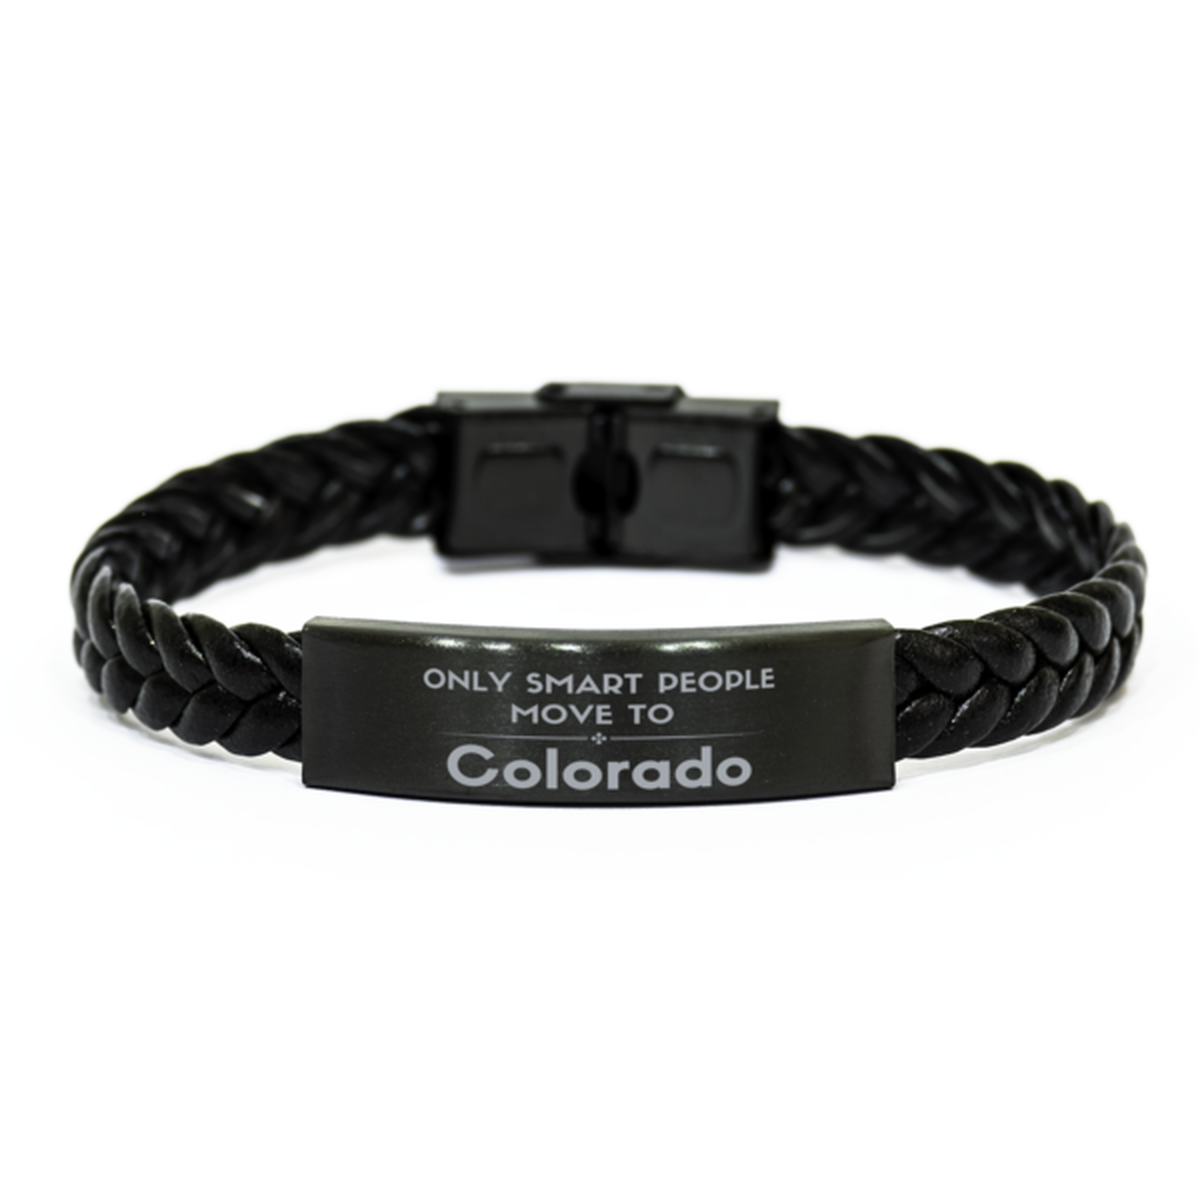 Only smart people move to Colorado Braided Leather Bracelet, Gag Gifts For Colorado, Move to Colorado Gifts for Friends Coworker Funny Saying Quote